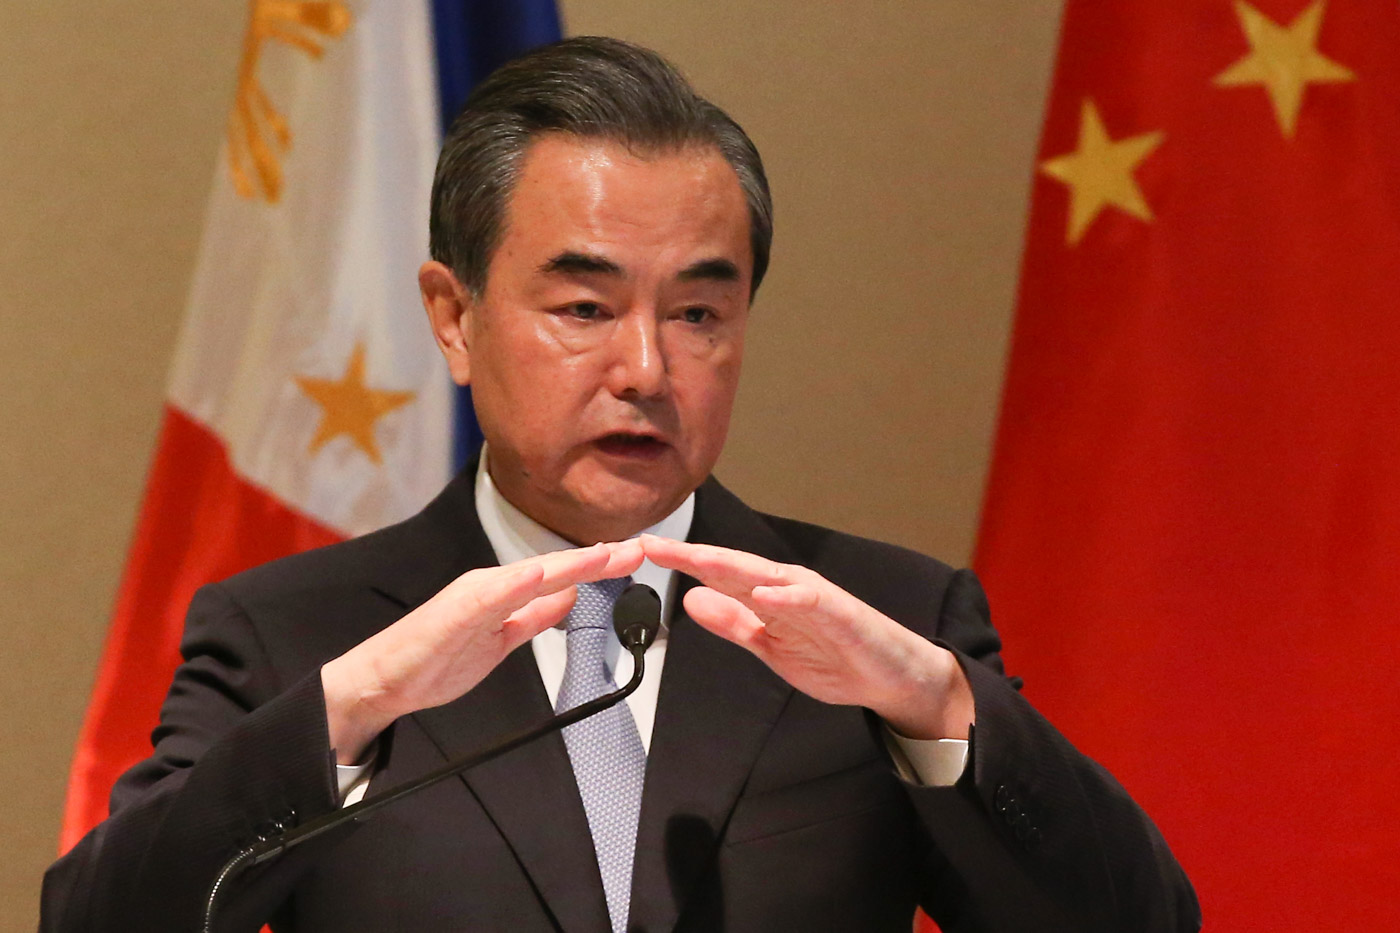 OFFICIAL VISIT. Chinese Foreign Minister Wang Yi speaks at a joint press conference with Philippine Foreign Secretary Alan Peter Cayetano at the Shangri-La Hotel in Taguig City on July 25, 2017. Photo by Ben Nabong/Rappler 